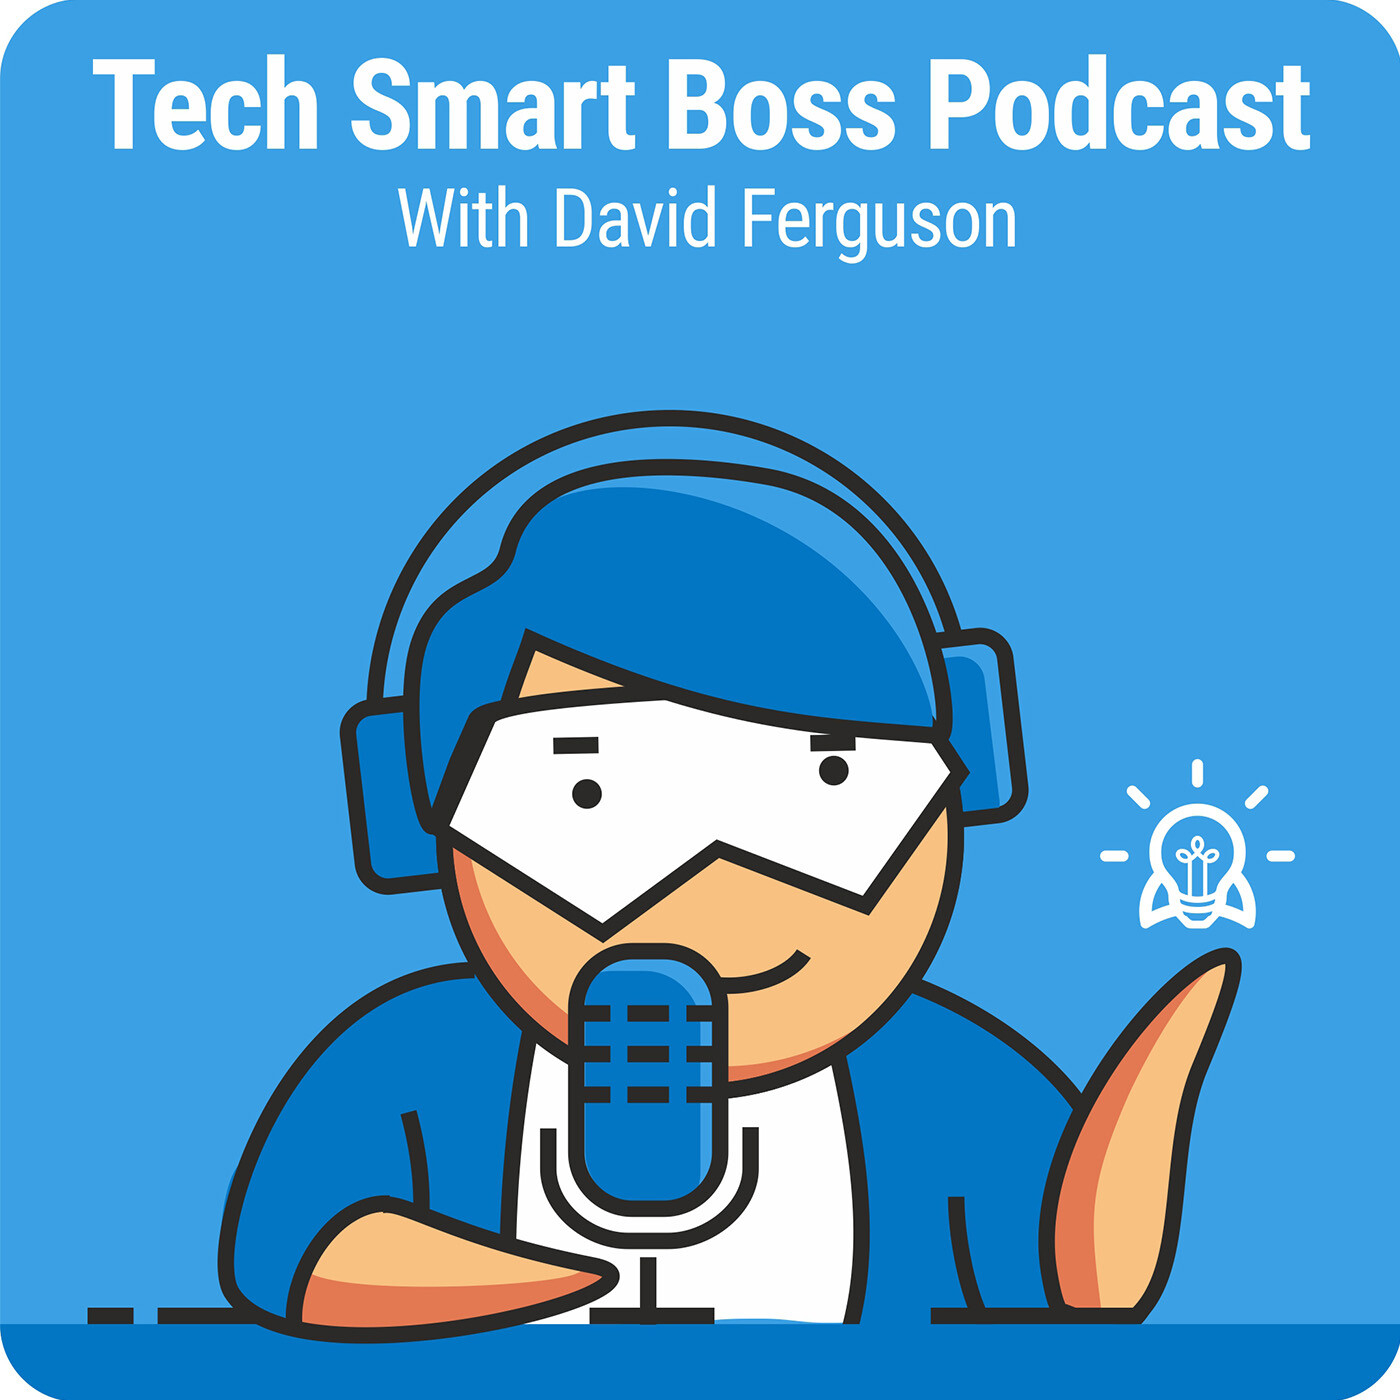 Episode 40: The Negatives of Leveraging Cloud and SaaS Technology In Your Business